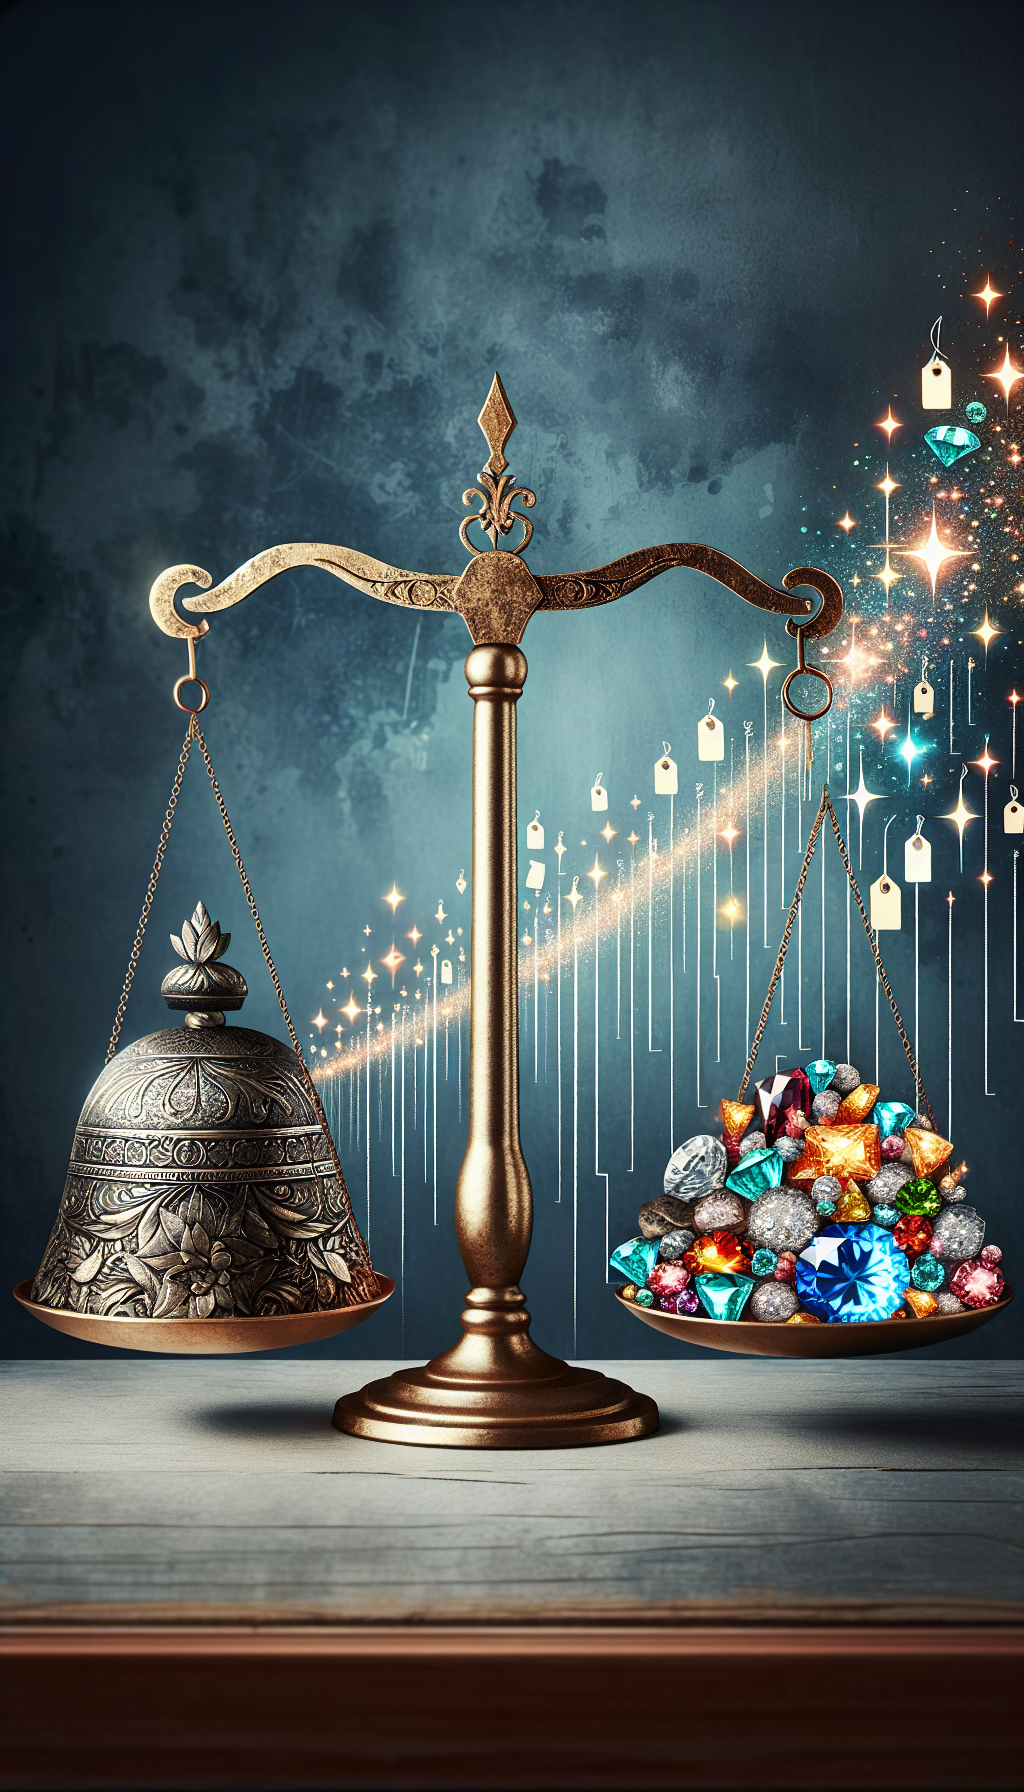 A whimsical scale balances a shiny, intricately designed antique cast iron bell on one side, with a heap of sparkling stars and rare gems on the other, symbolizing the intrinsic value of condition and rarity. The backdrop features faded price tags floating upward, emphasizing the bell's escalating worth.

16:9